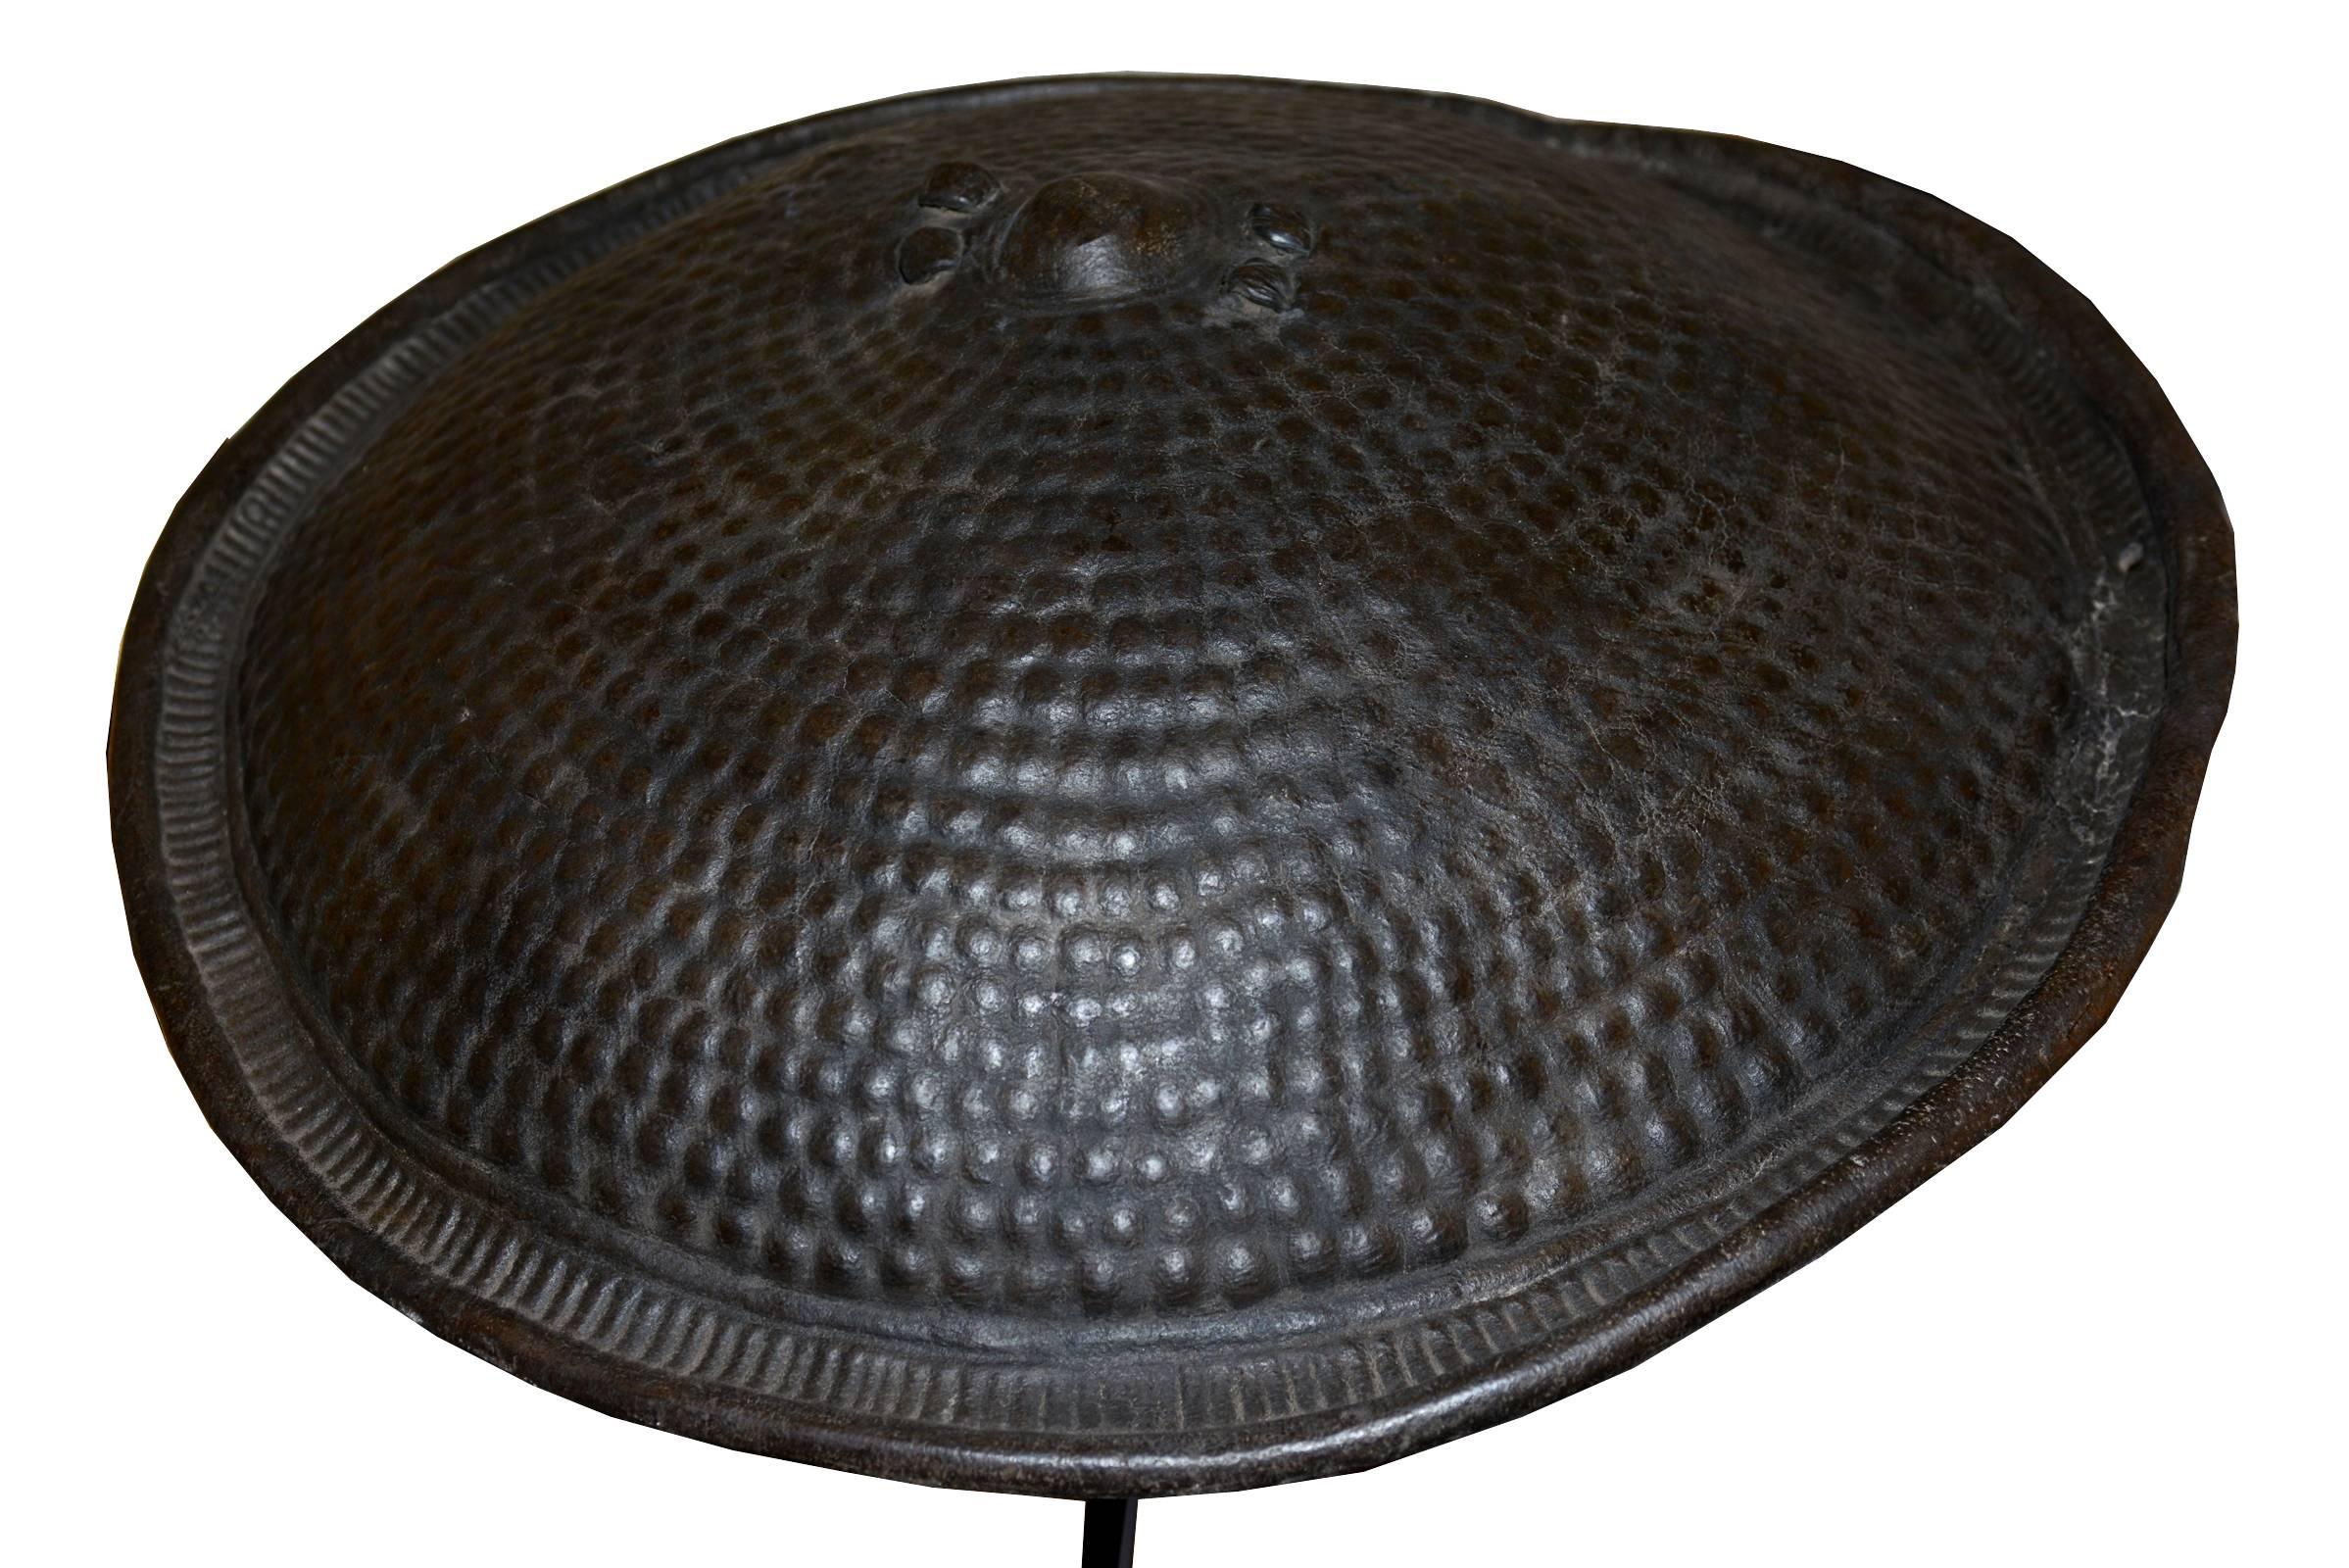 Hand-Crafted African Shield Wallaïta from Ethiopia Early 20th Century For Sale